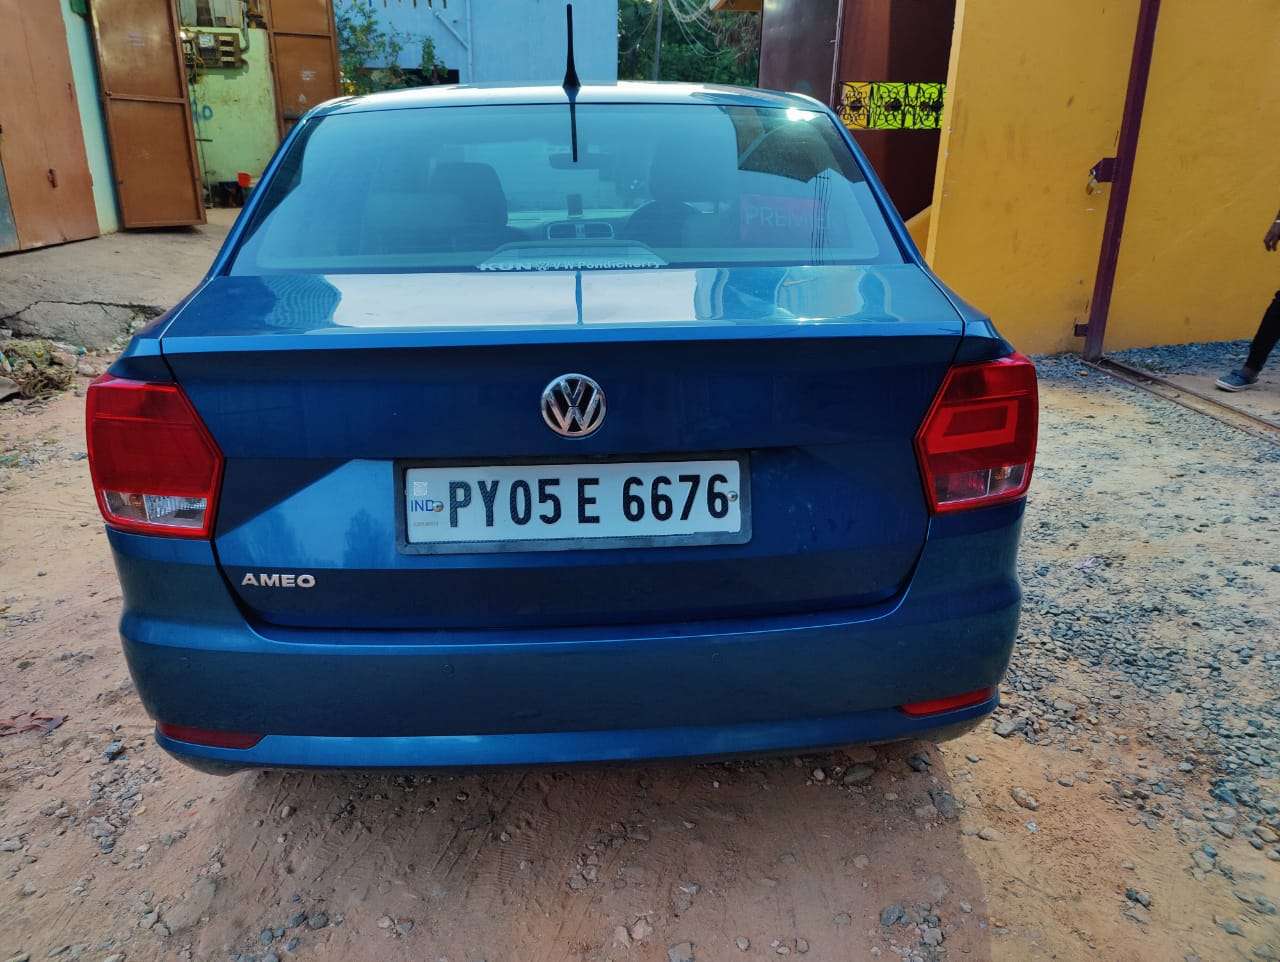 3076-for-sale-Volks-Wagen-Ameo-Petrol-First-Owner-2018-PY-registered-rs-545000